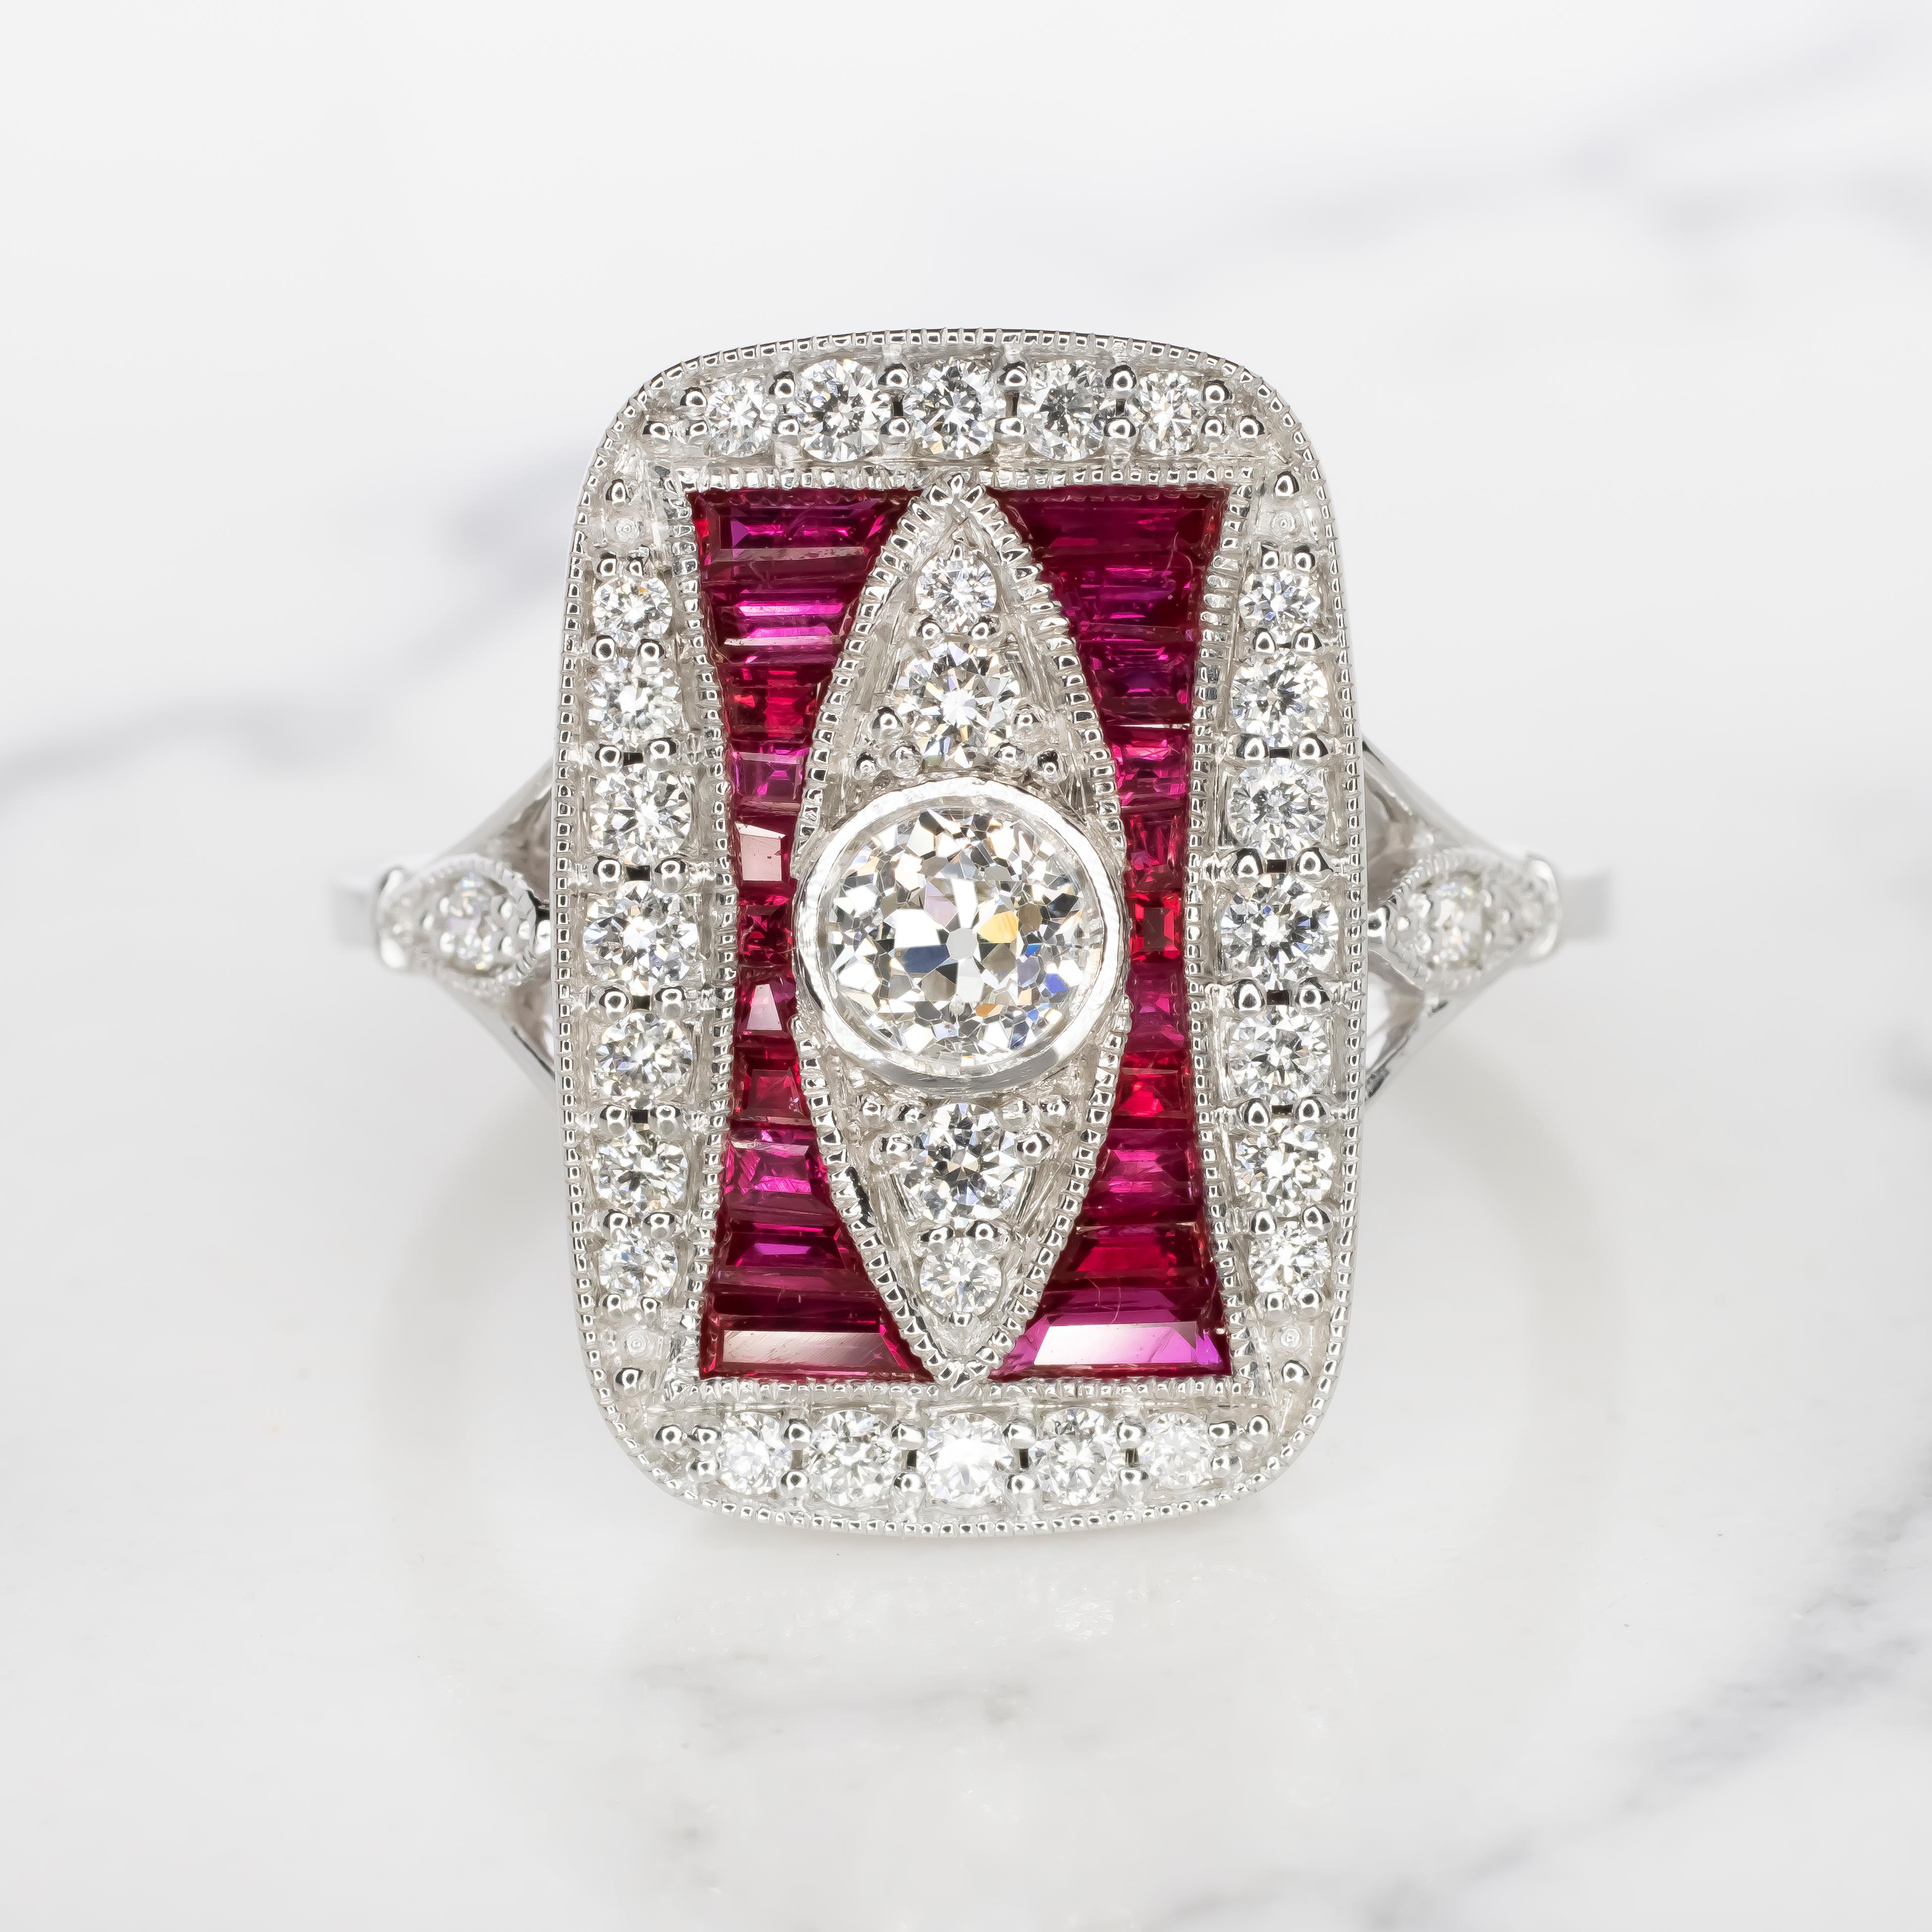 Women's or Men's Art Deco Style Rubies Old Mine Cut Diamond Cocktail Ring